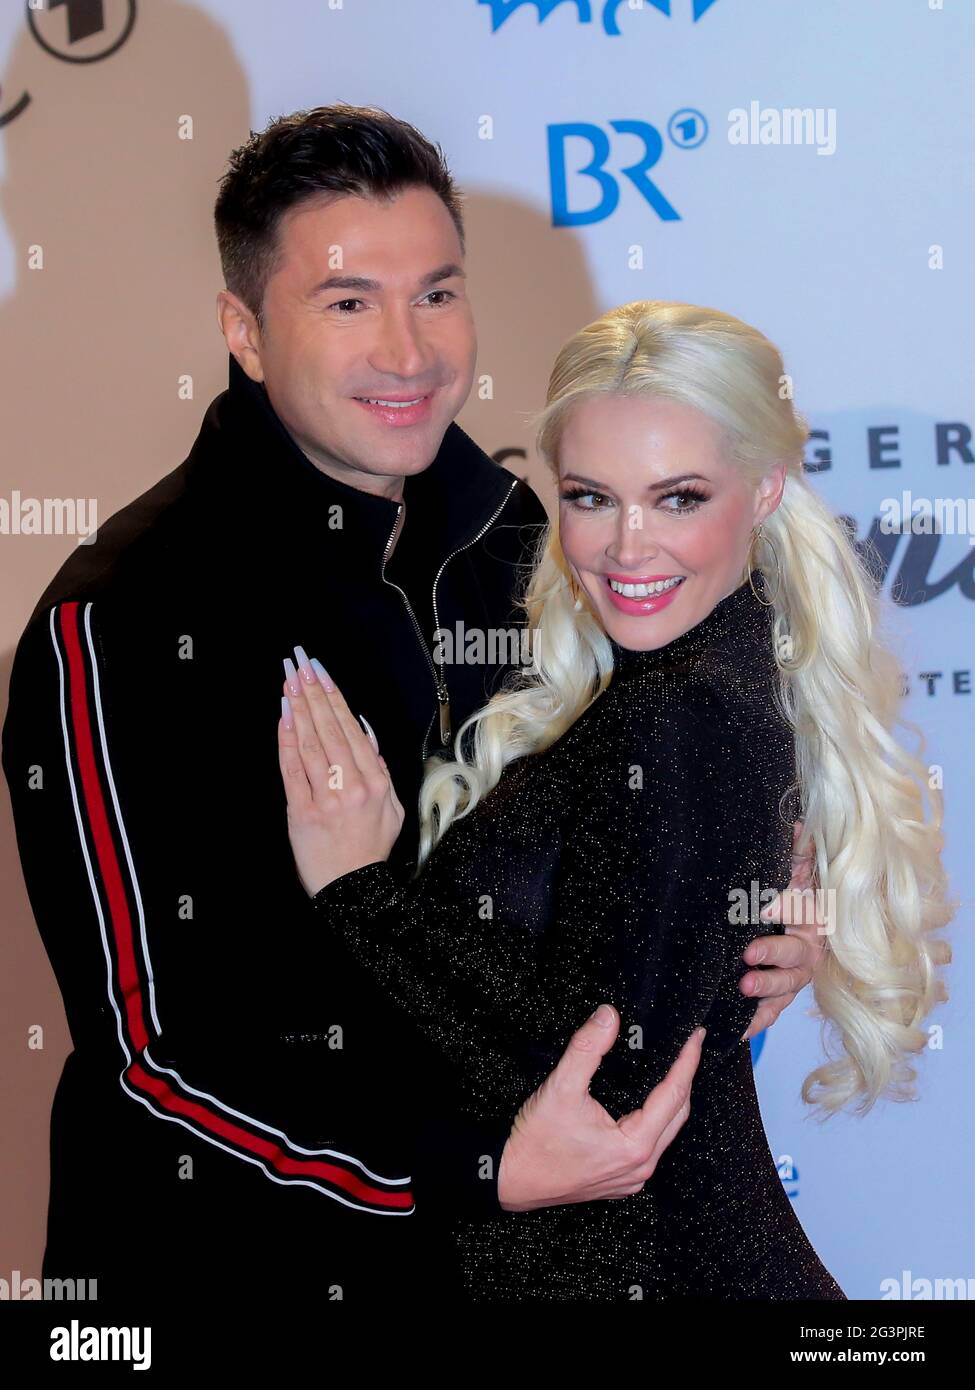 Singer Lucas Cordalis with German model and singer wife Daniela Katzenberger Schlagerchampions 2020 Stock Photo